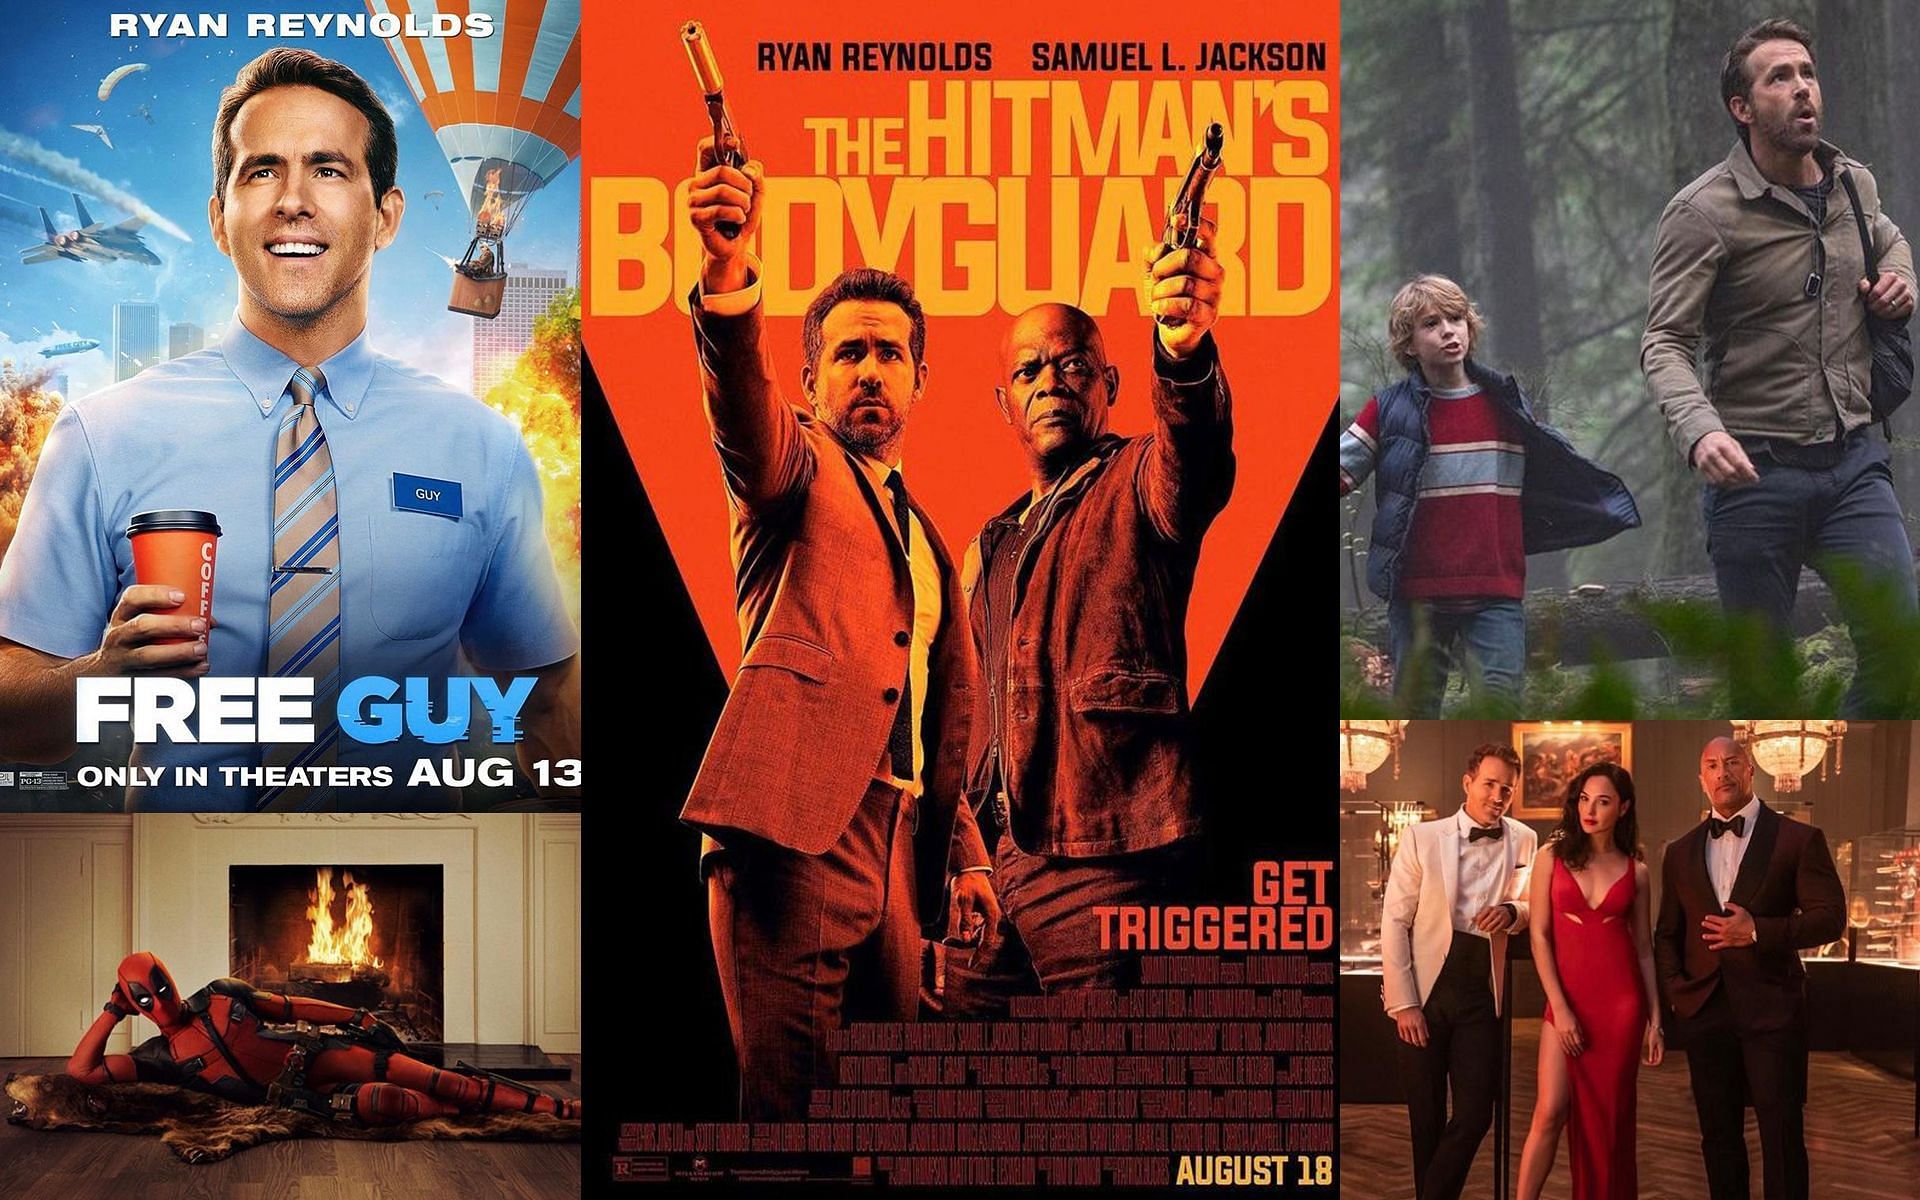 Other Ryan Reynolds Movies You Should Watch After Free Guy